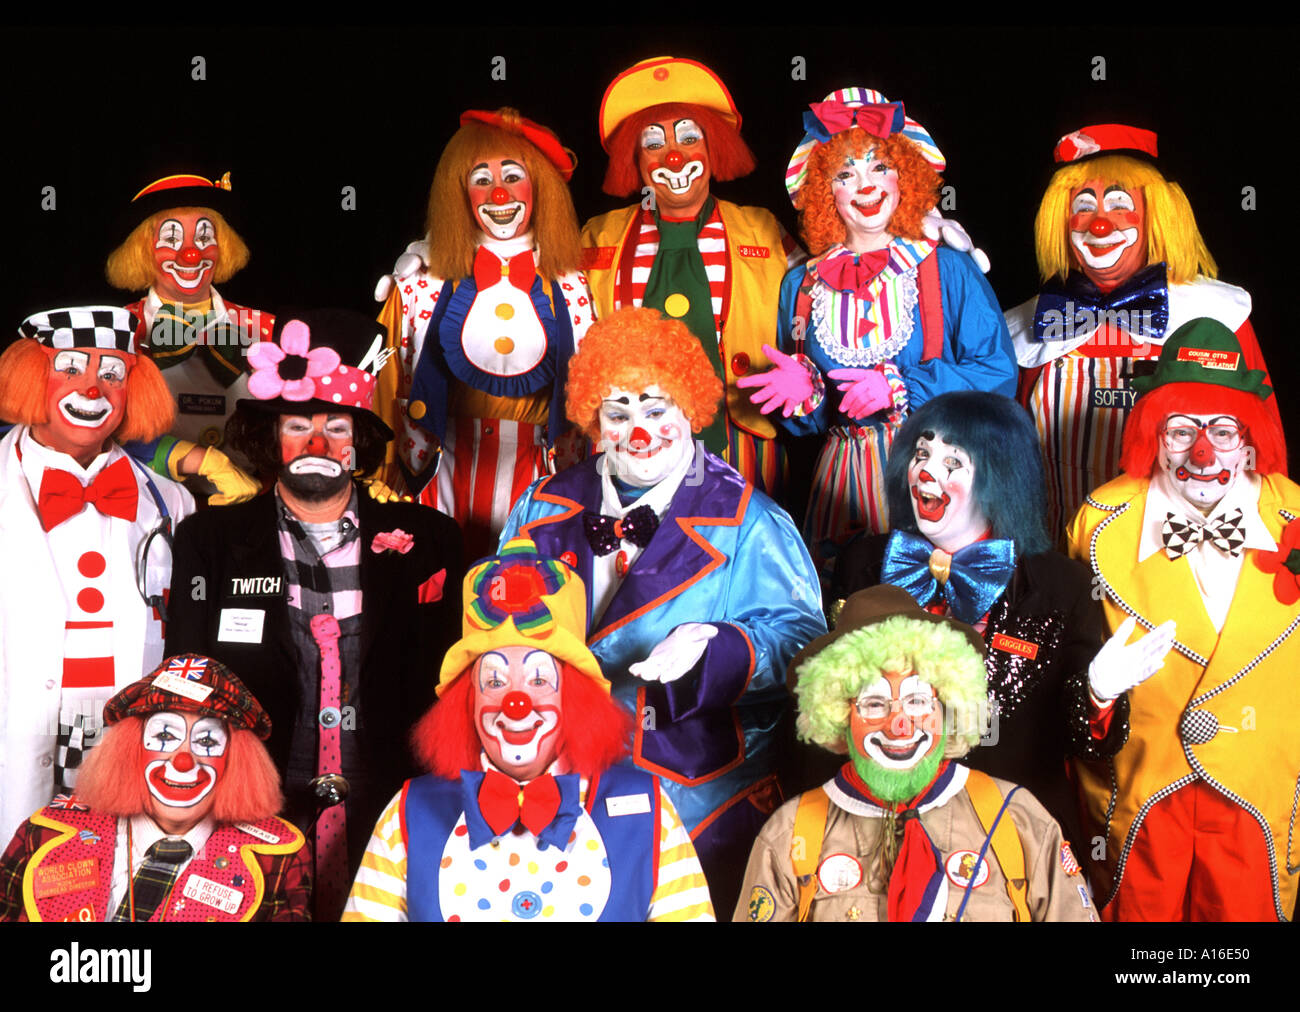 Image result for images of clowns